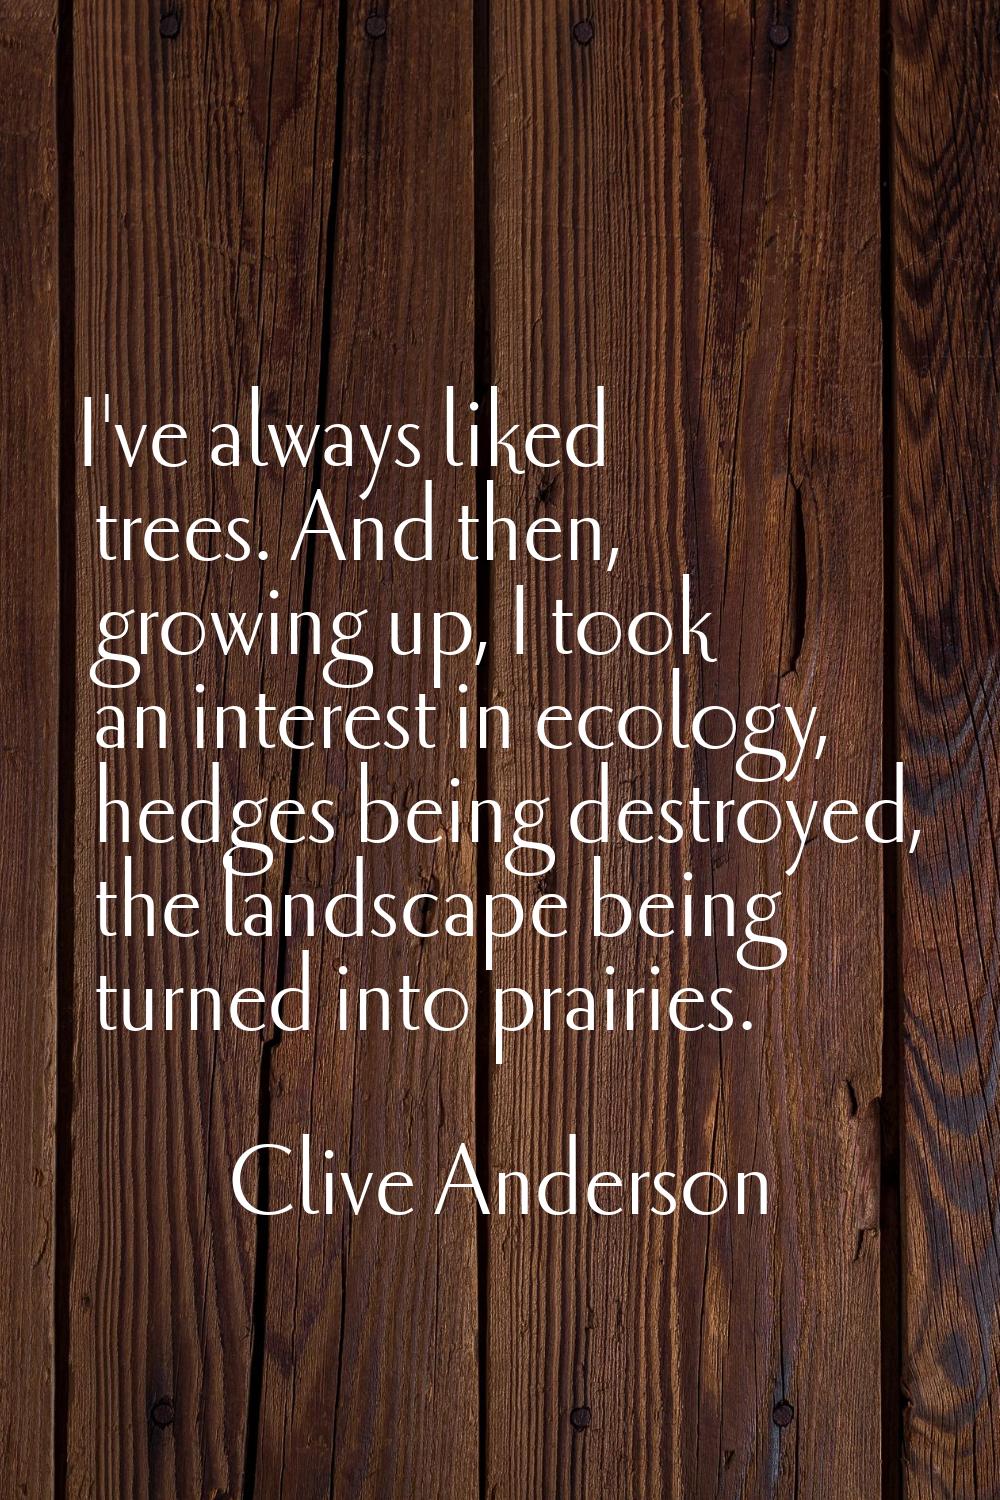 I've always liked trees. And then, growing up, I took an interest in ecology, hedges being destroye